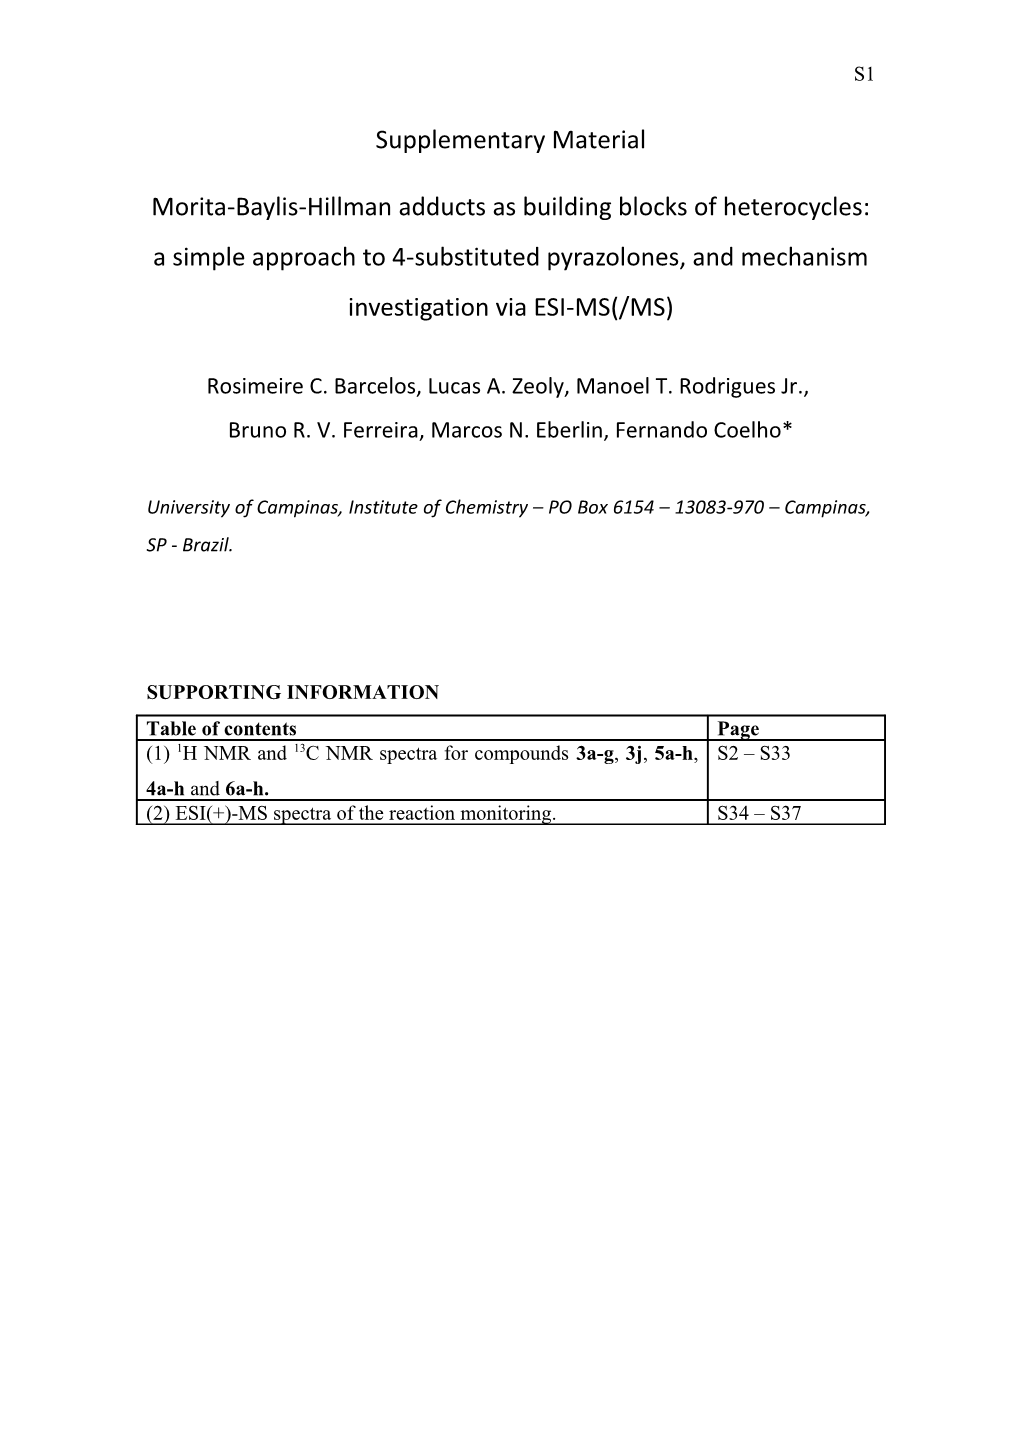 Ssynthesis of Substituted Pyrazolones from Morita-Baylis-Hillman Adducts